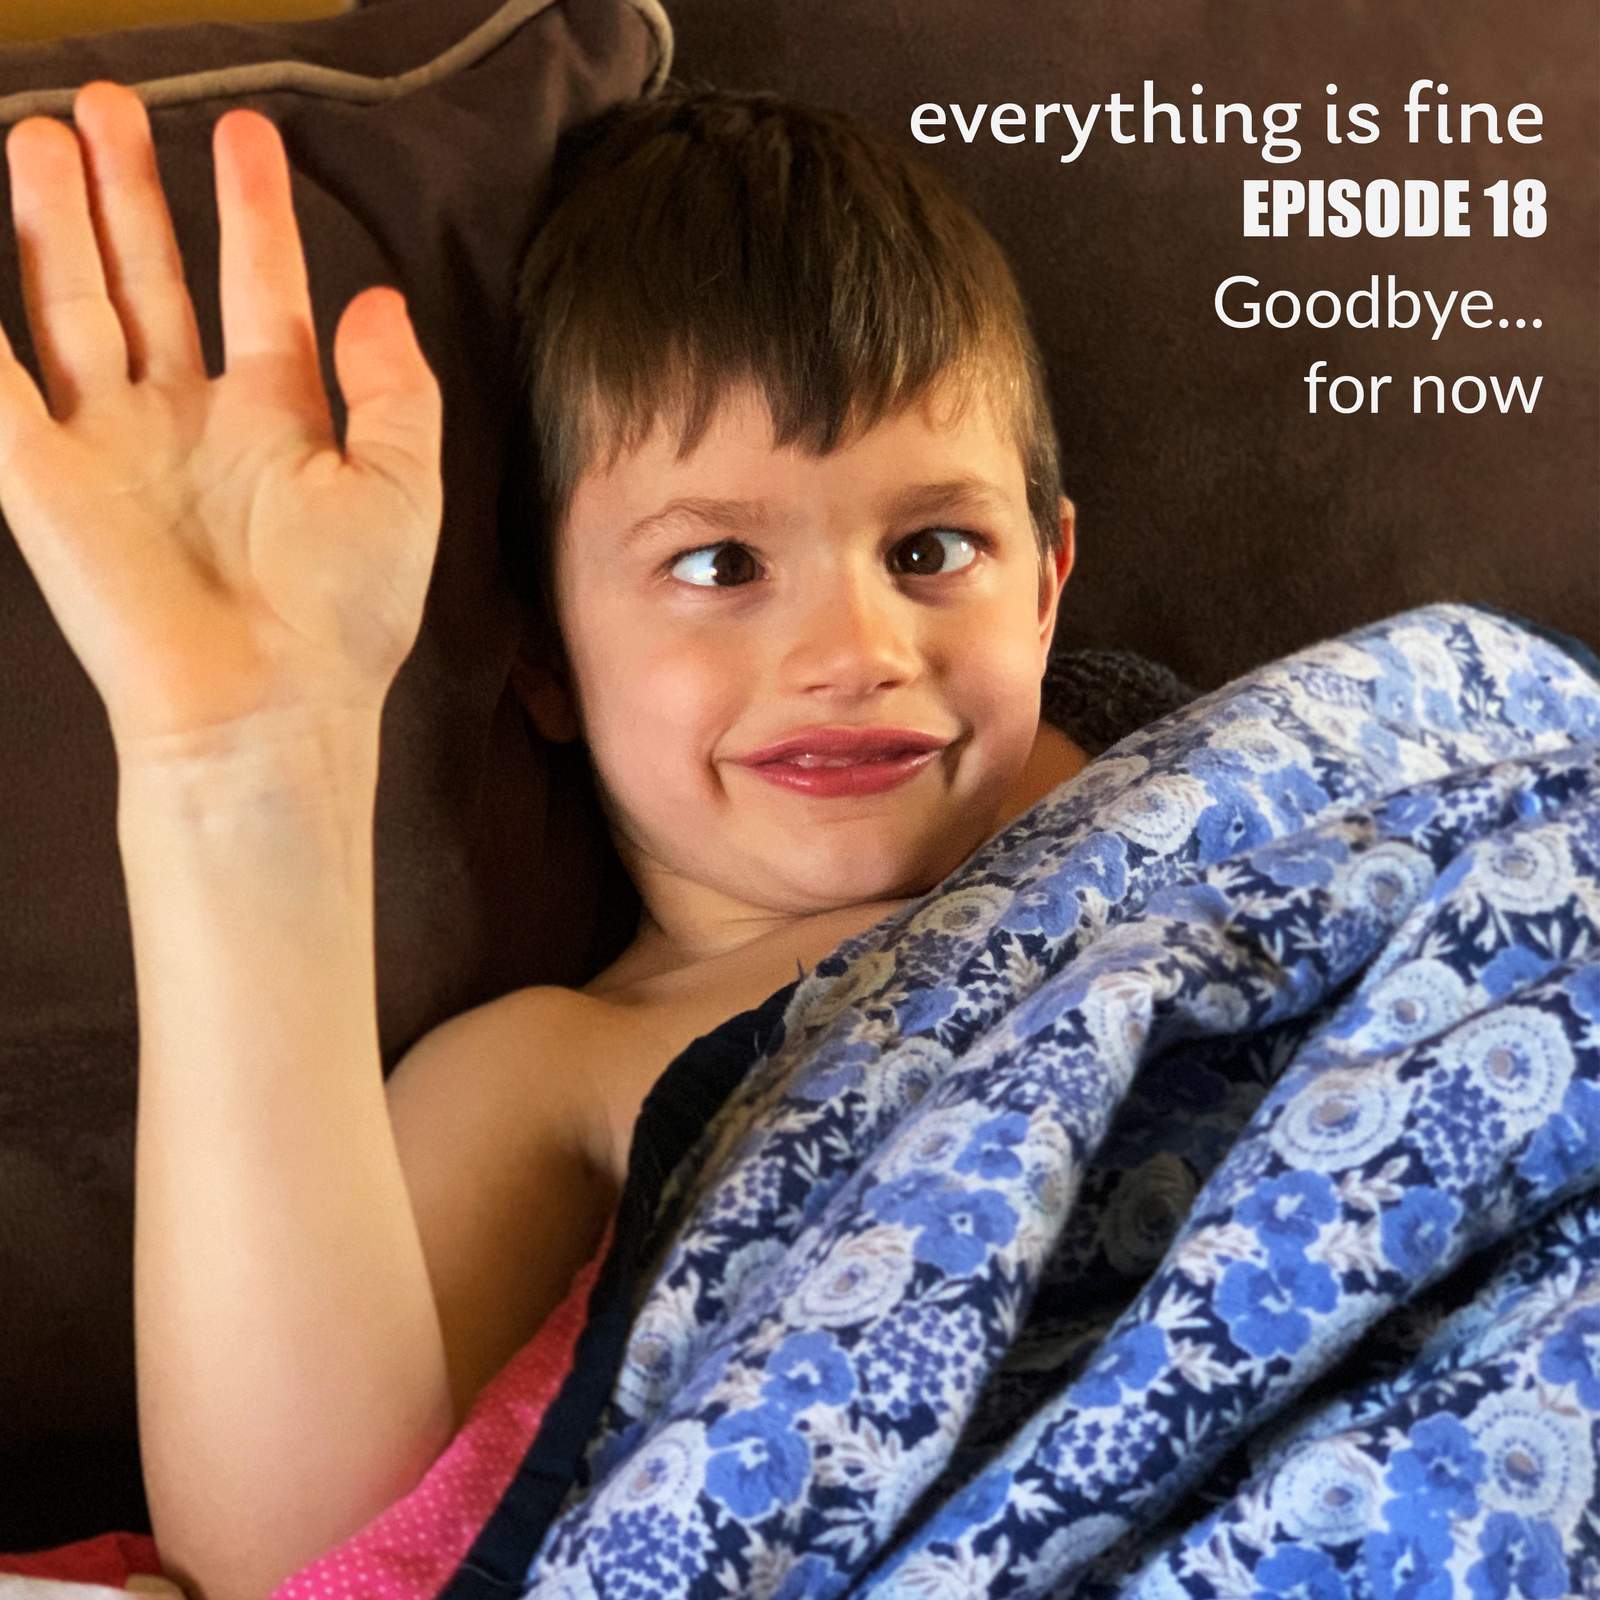 ‘Everything is Fine’ podcast: Goodbye... for now